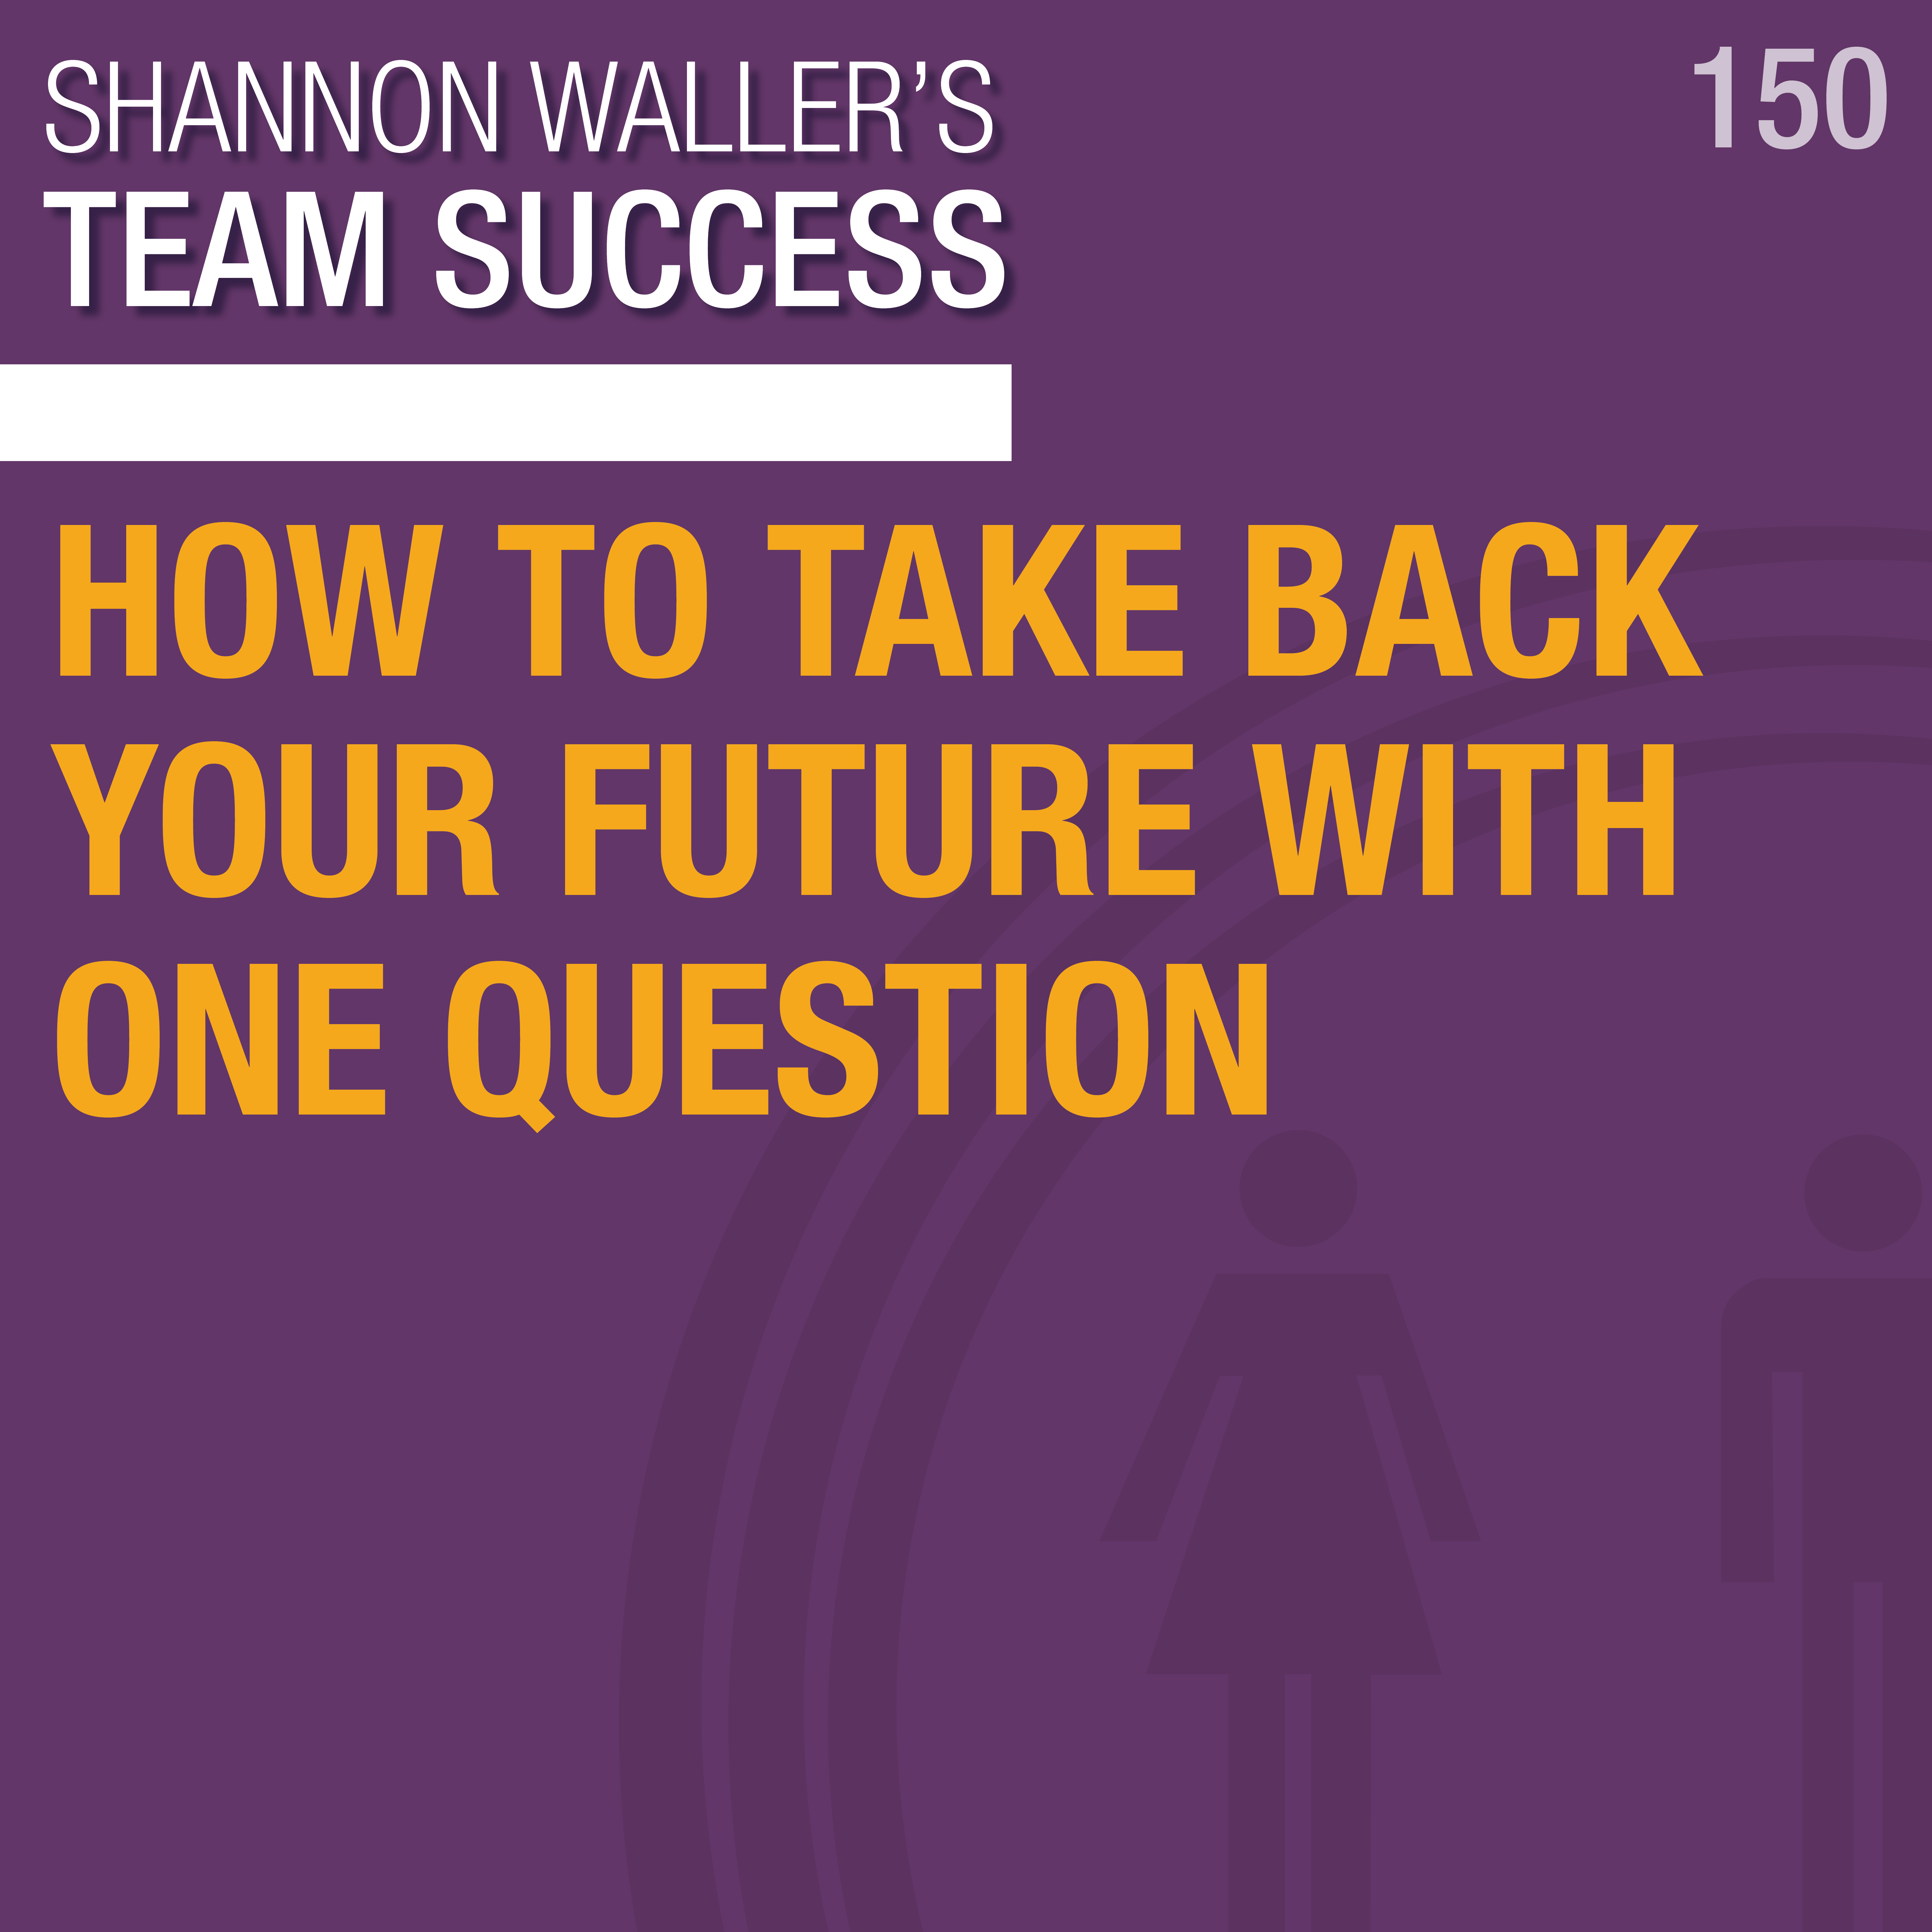 How To Take Back Your Future With One Question